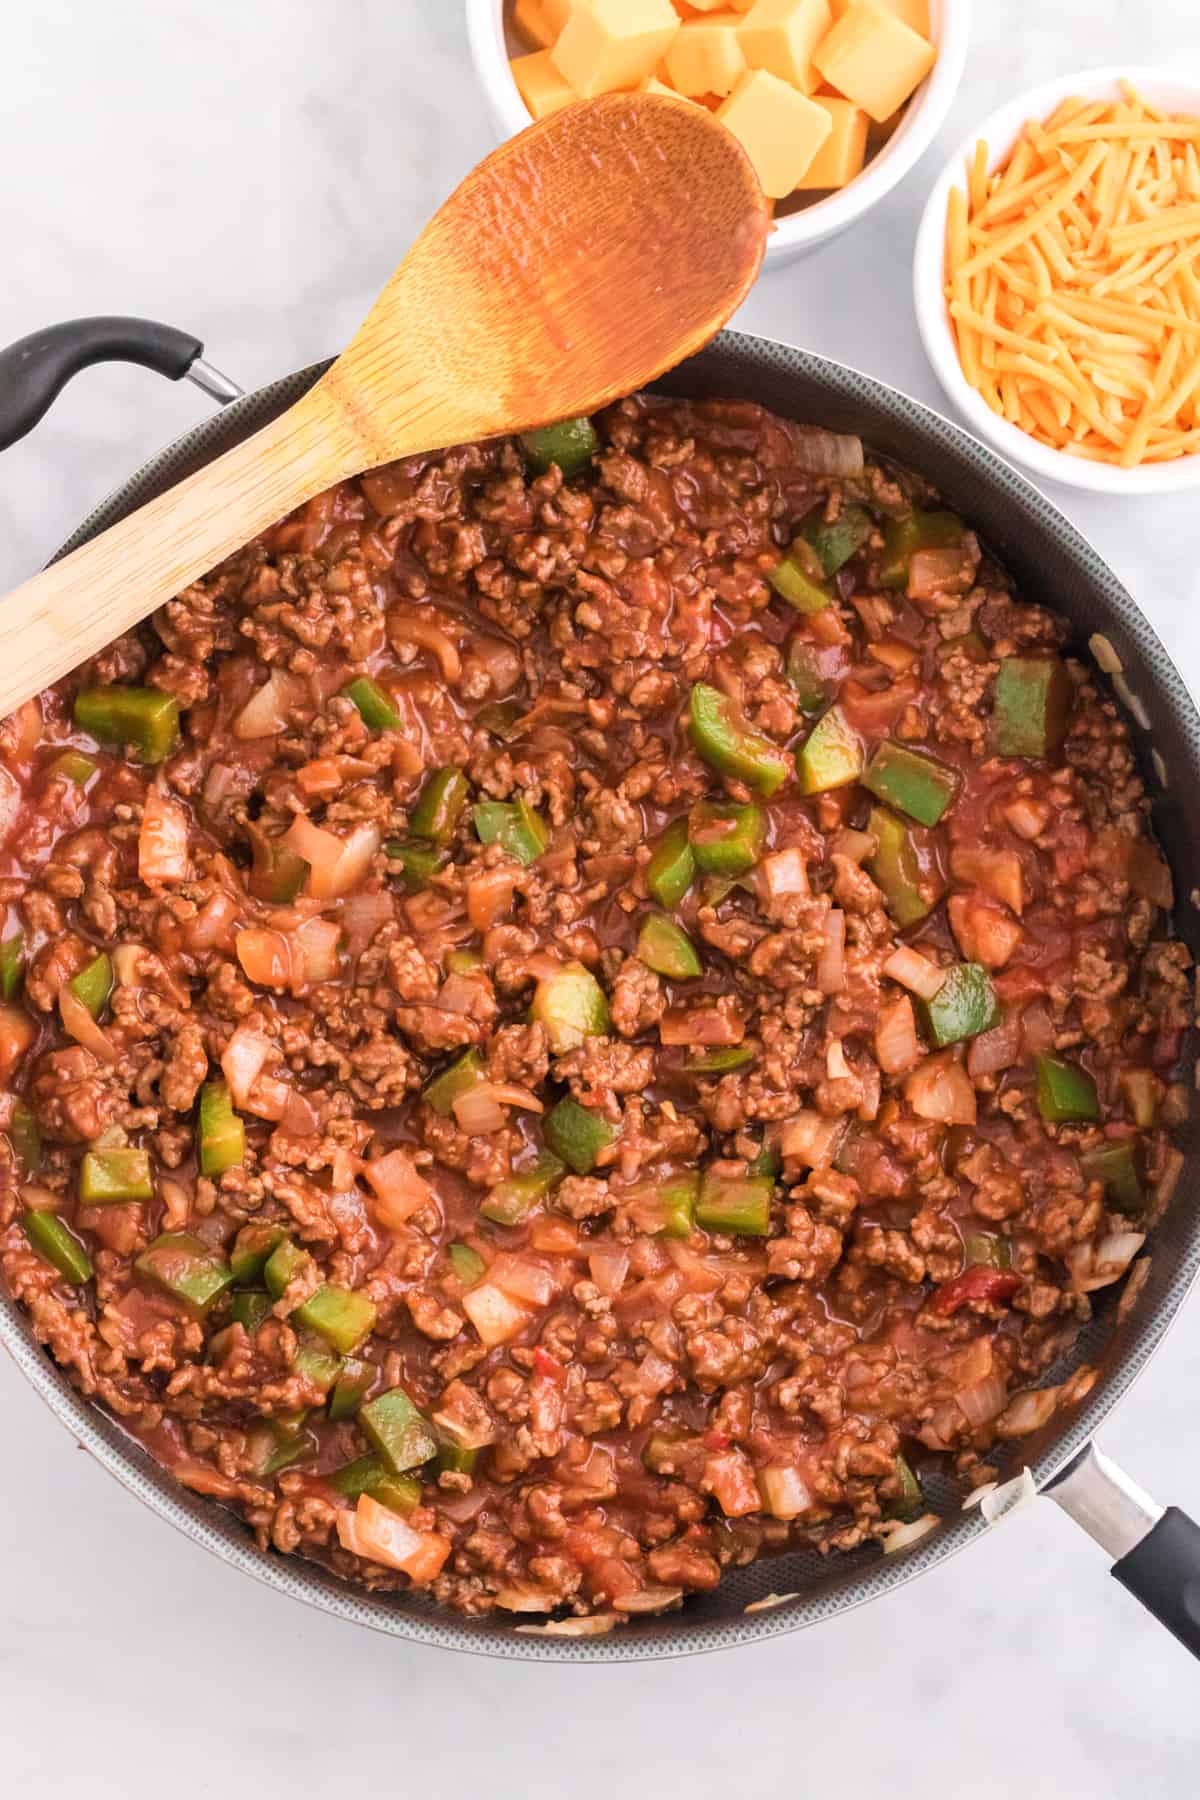 Cooked ground beef, peppers, and and onions covered in manwich sloppy joe sauce in a large skillet.